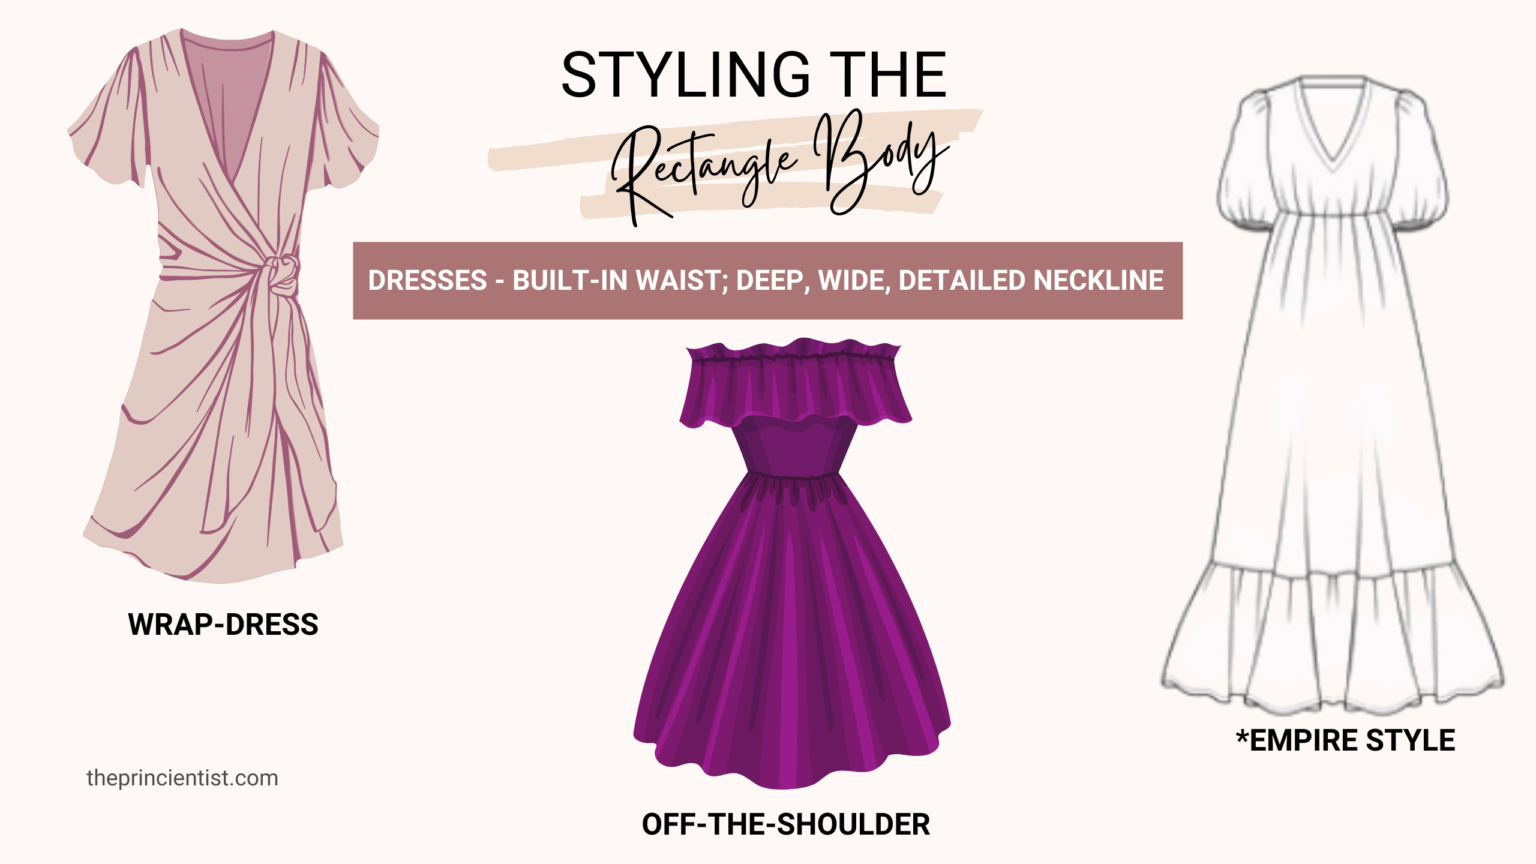 how to dress the rectangle body shape - dresses built-in waist, deep and wide necklines